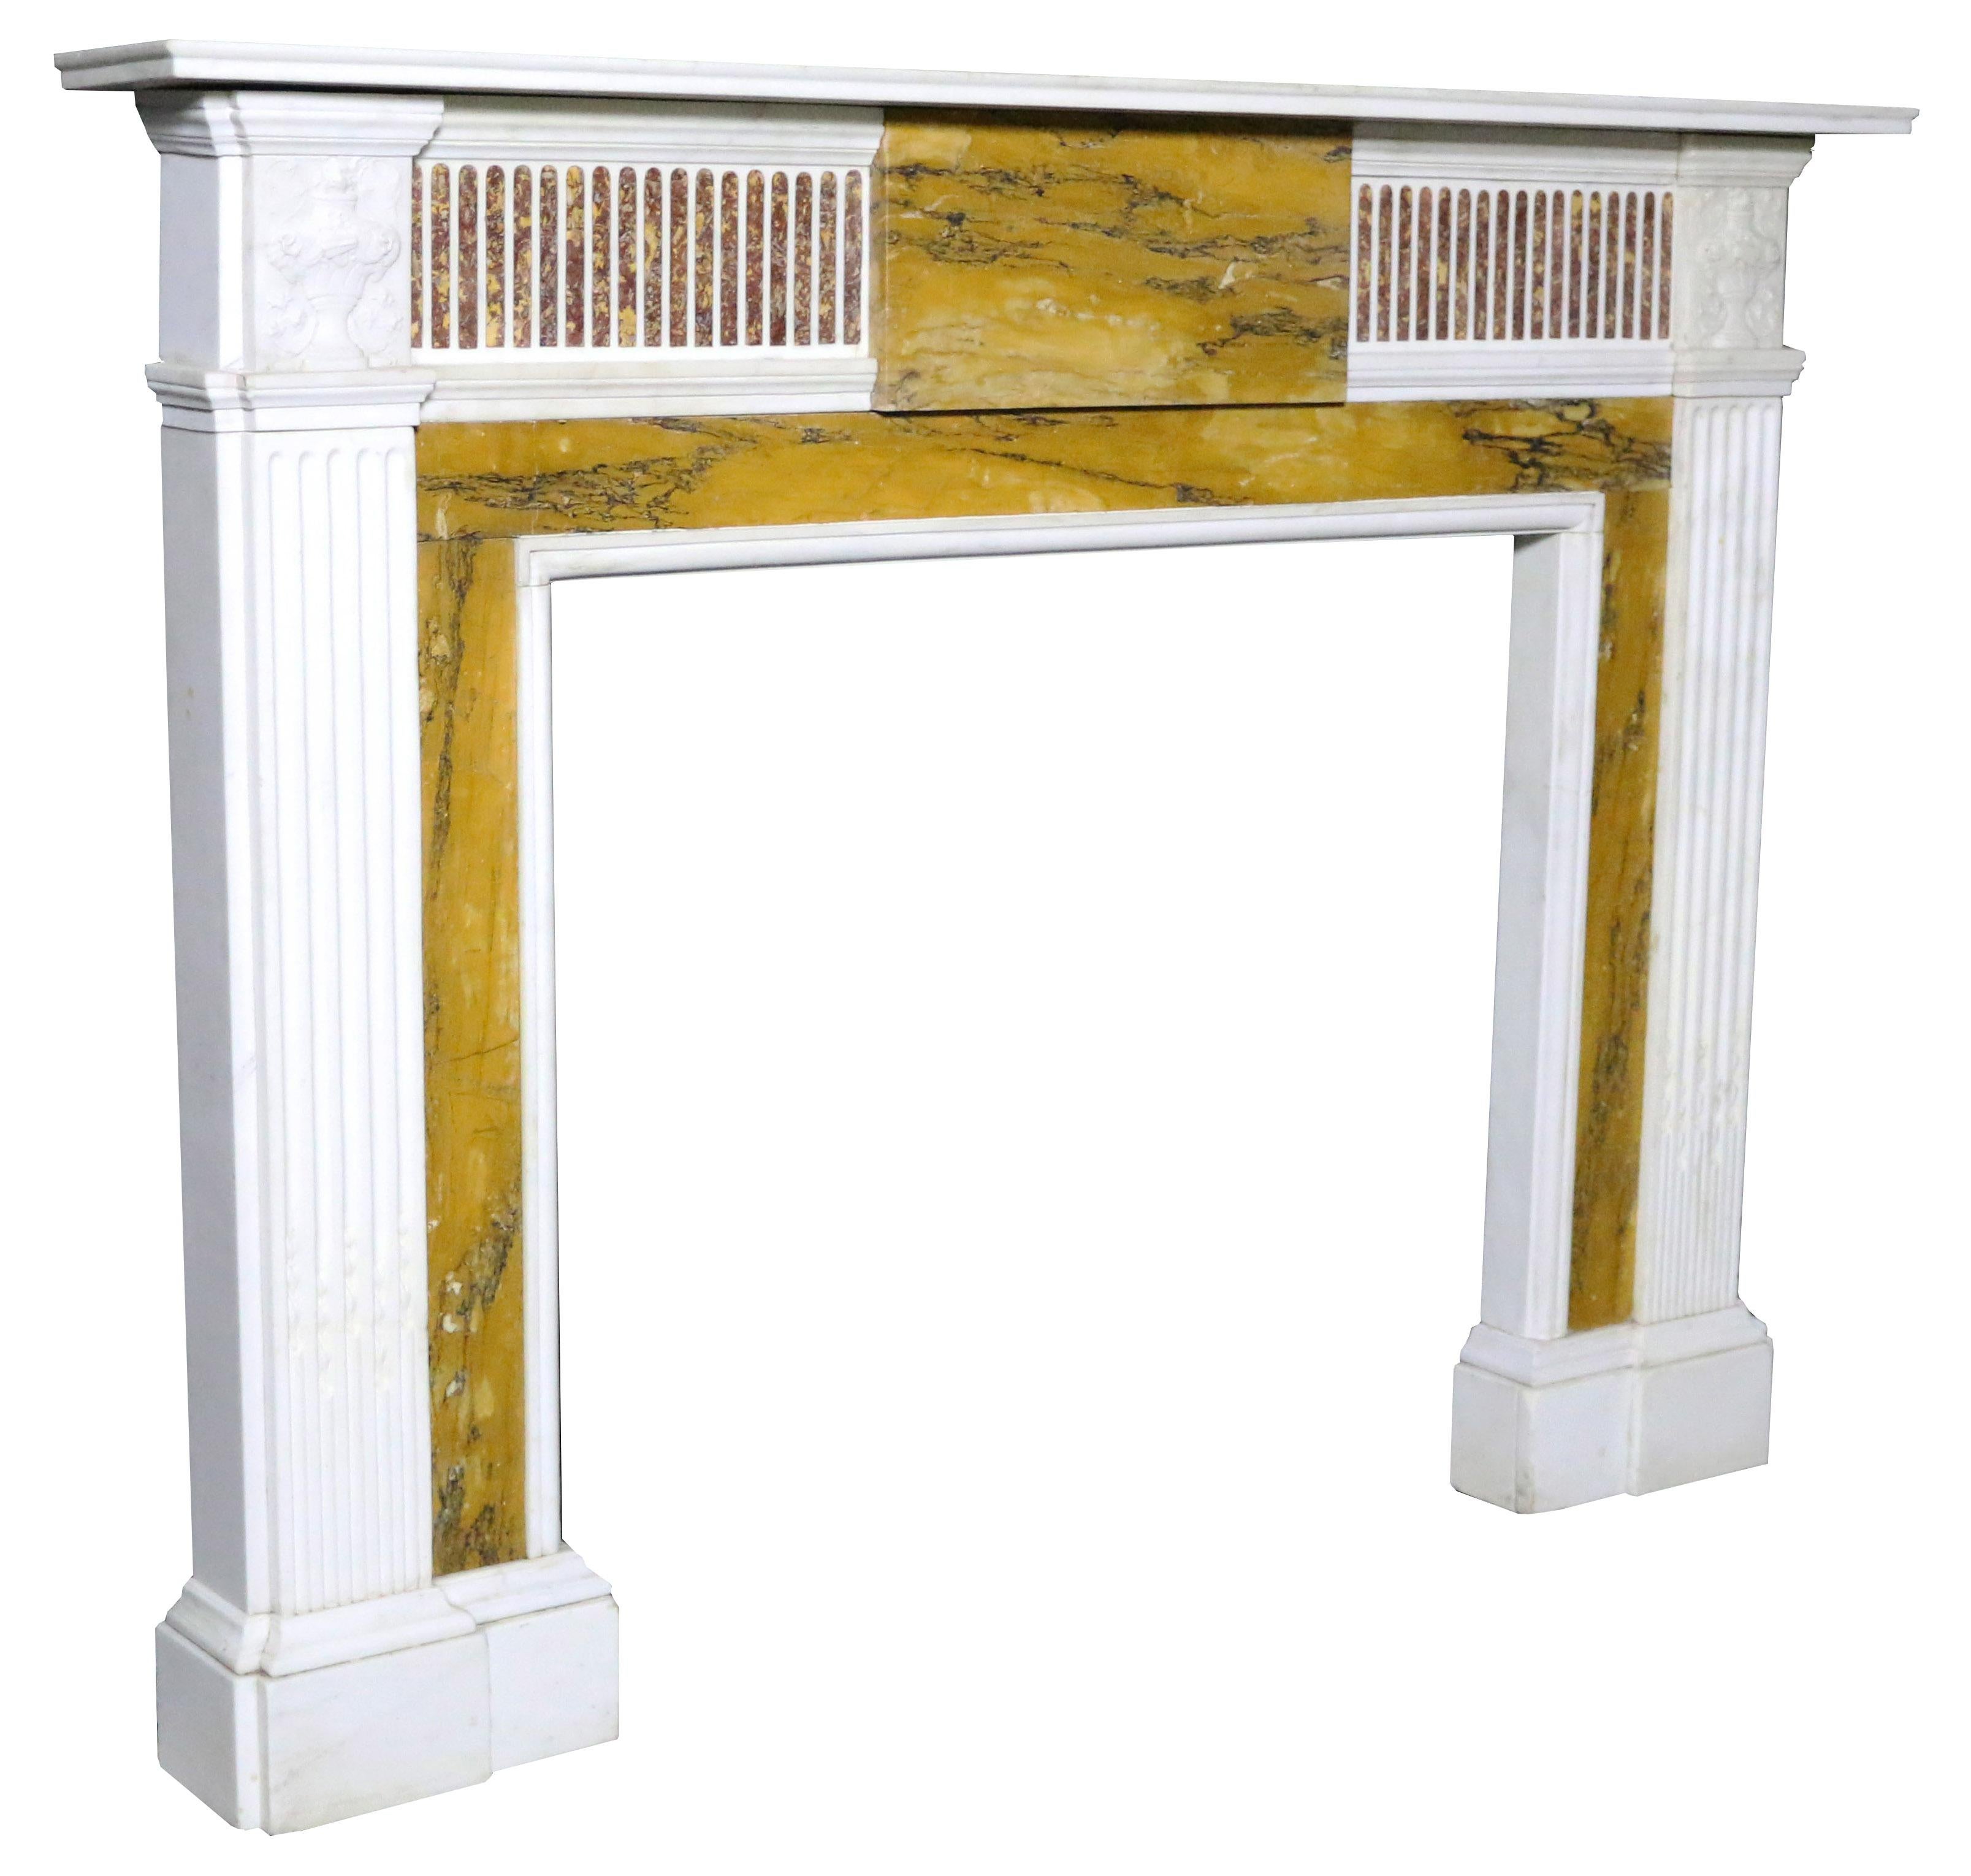 Large Antique George III Style Sienna Marble Fireplace Surround In Good Condition For Sale In Wormelow, Herefordshire